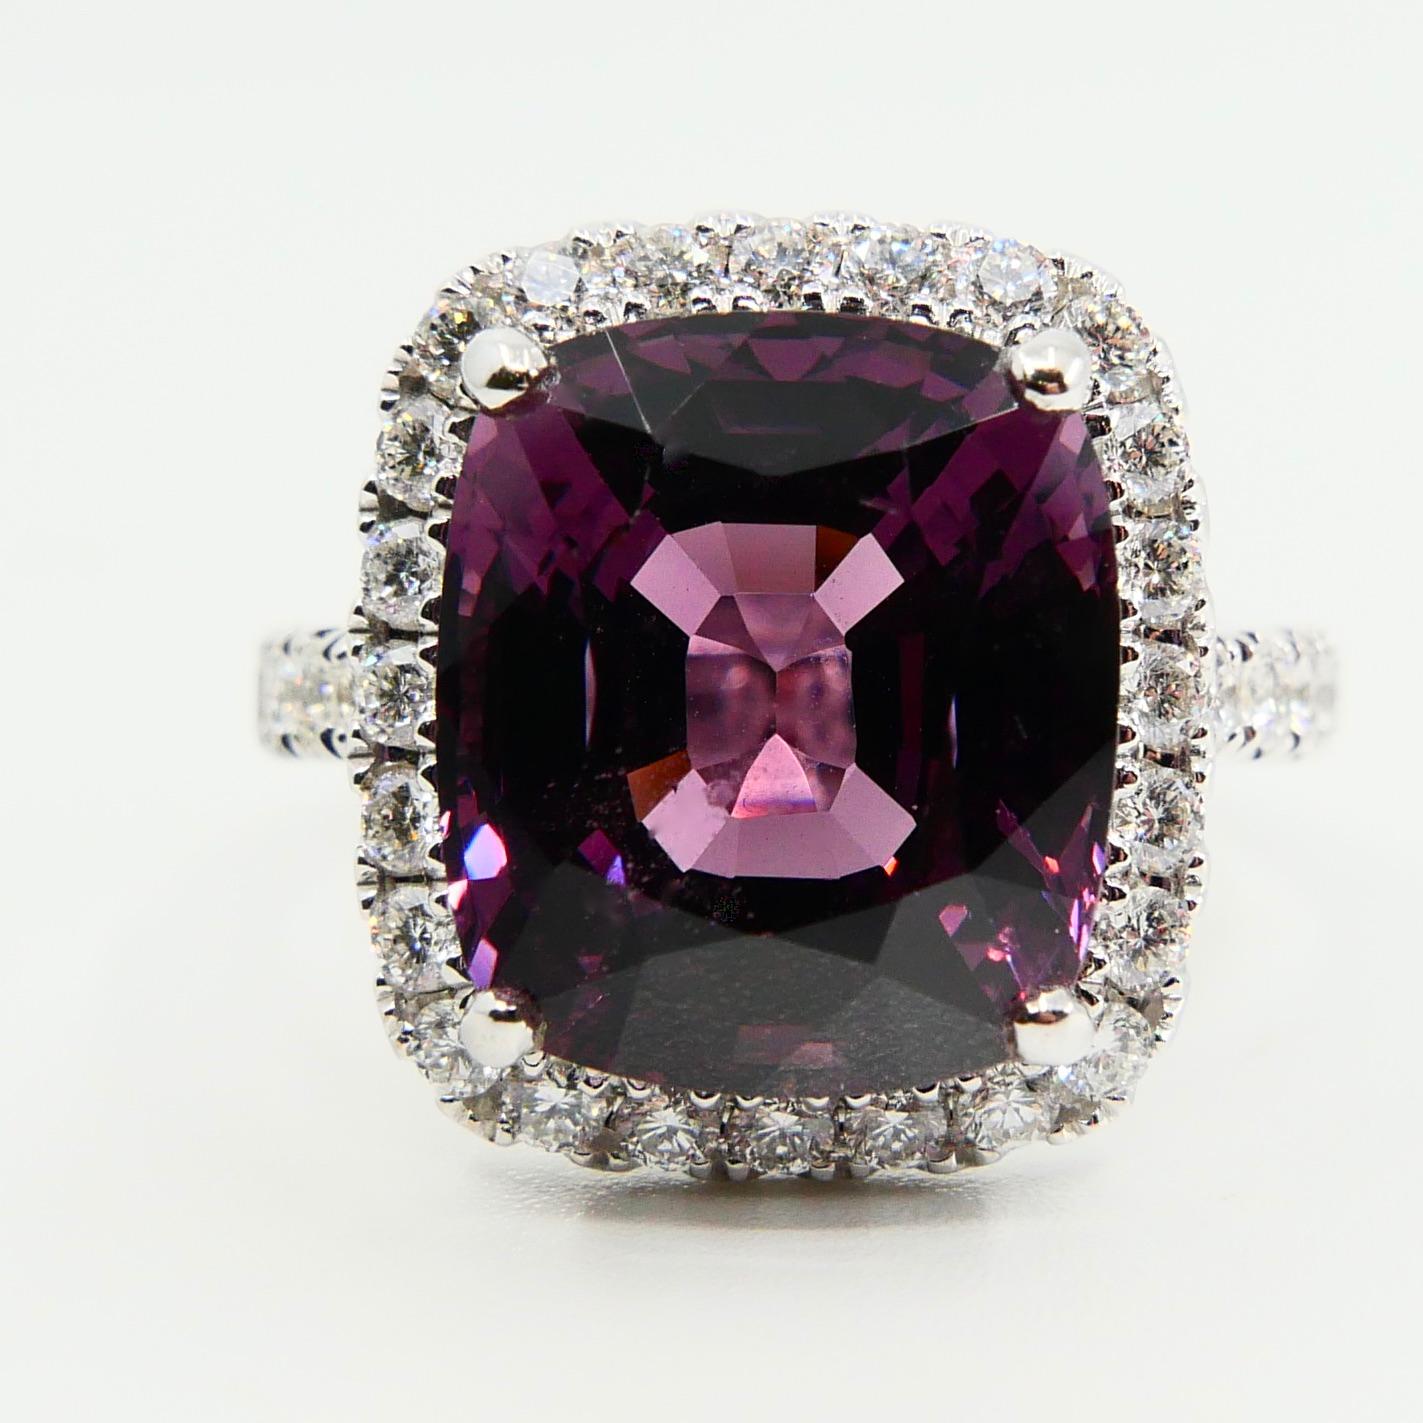 Certified Natural 9.18 Carat Vivid Purple No Heat Spinel & Diamond Cocktail Ring For Sale 5